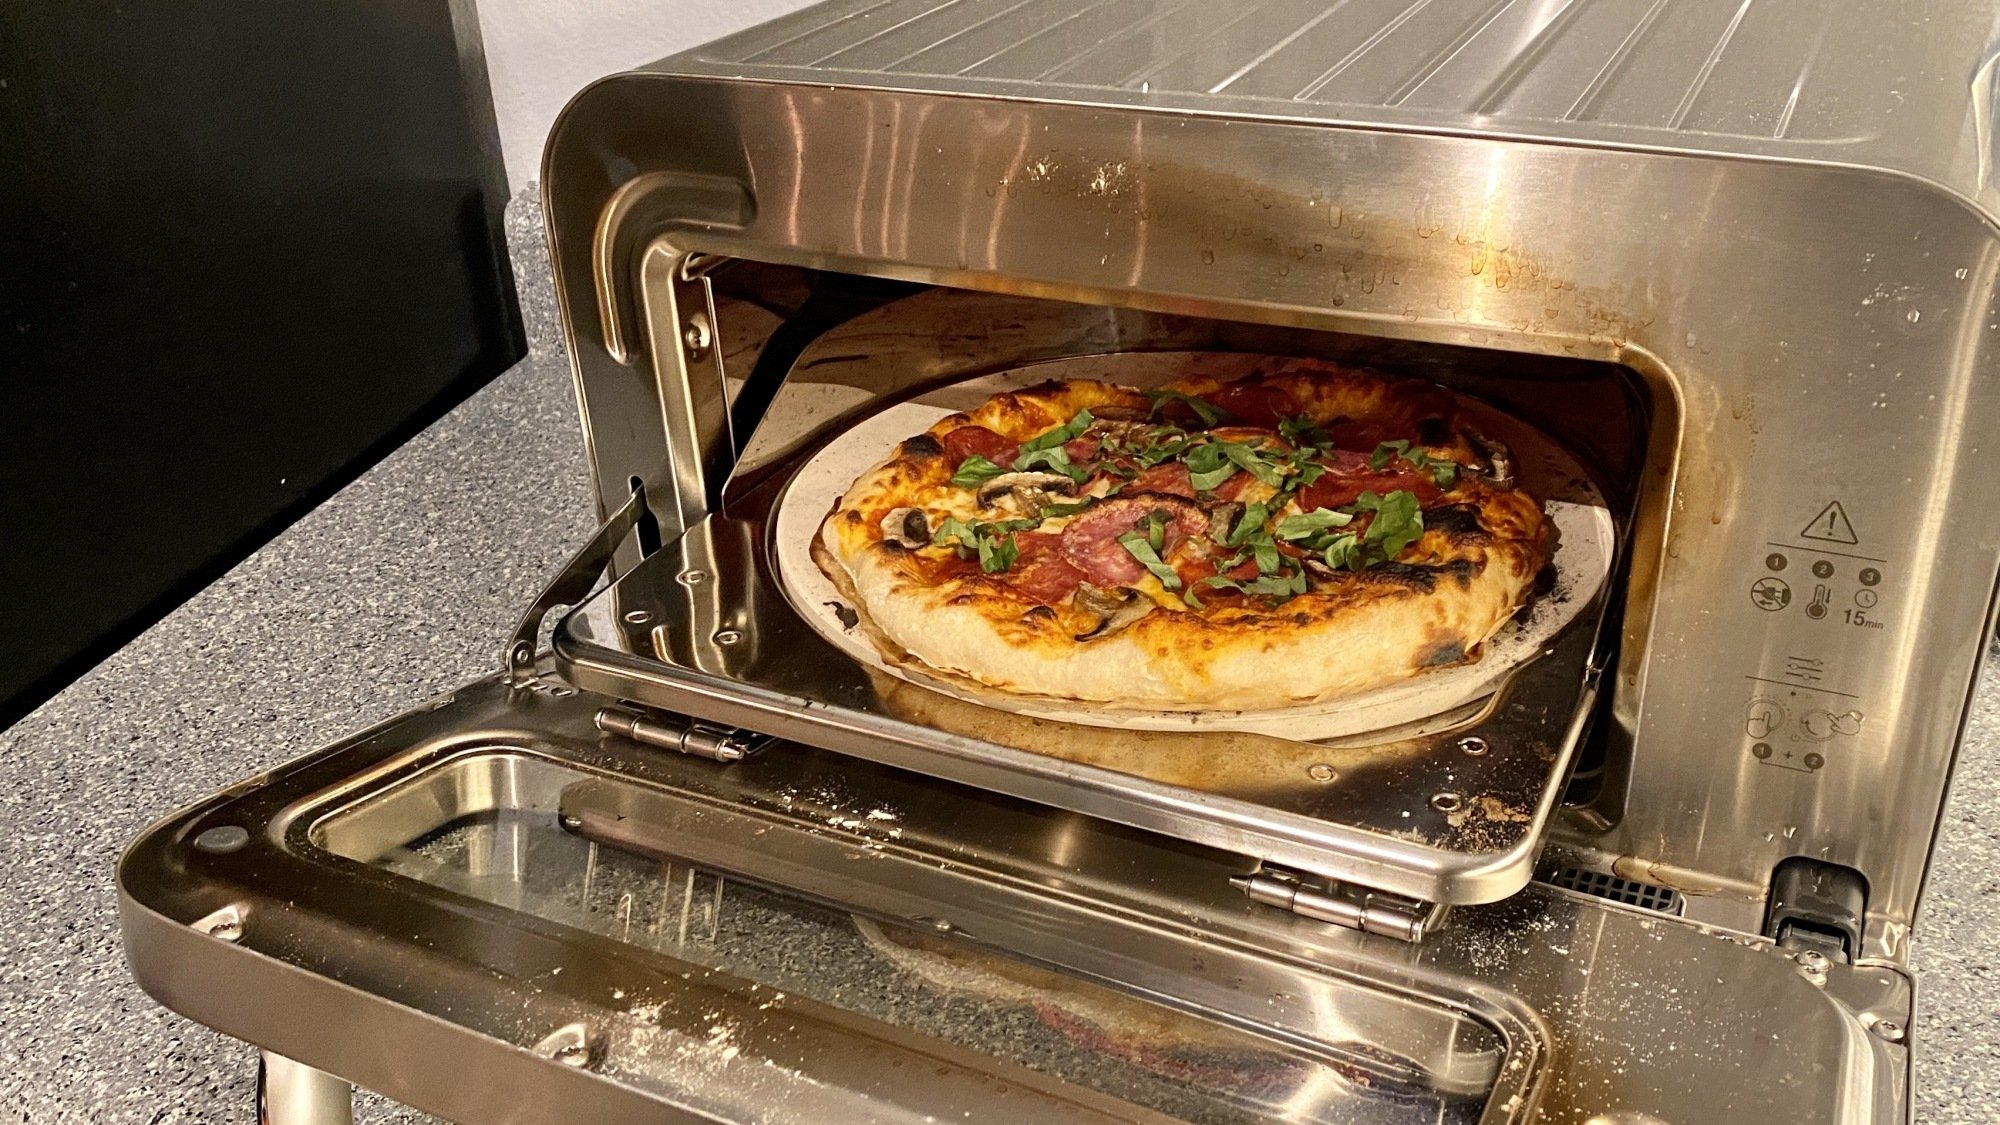 A pizza oven is open with a pizza inside. The pizza oven has some staining and discoloration on the inside of the door.